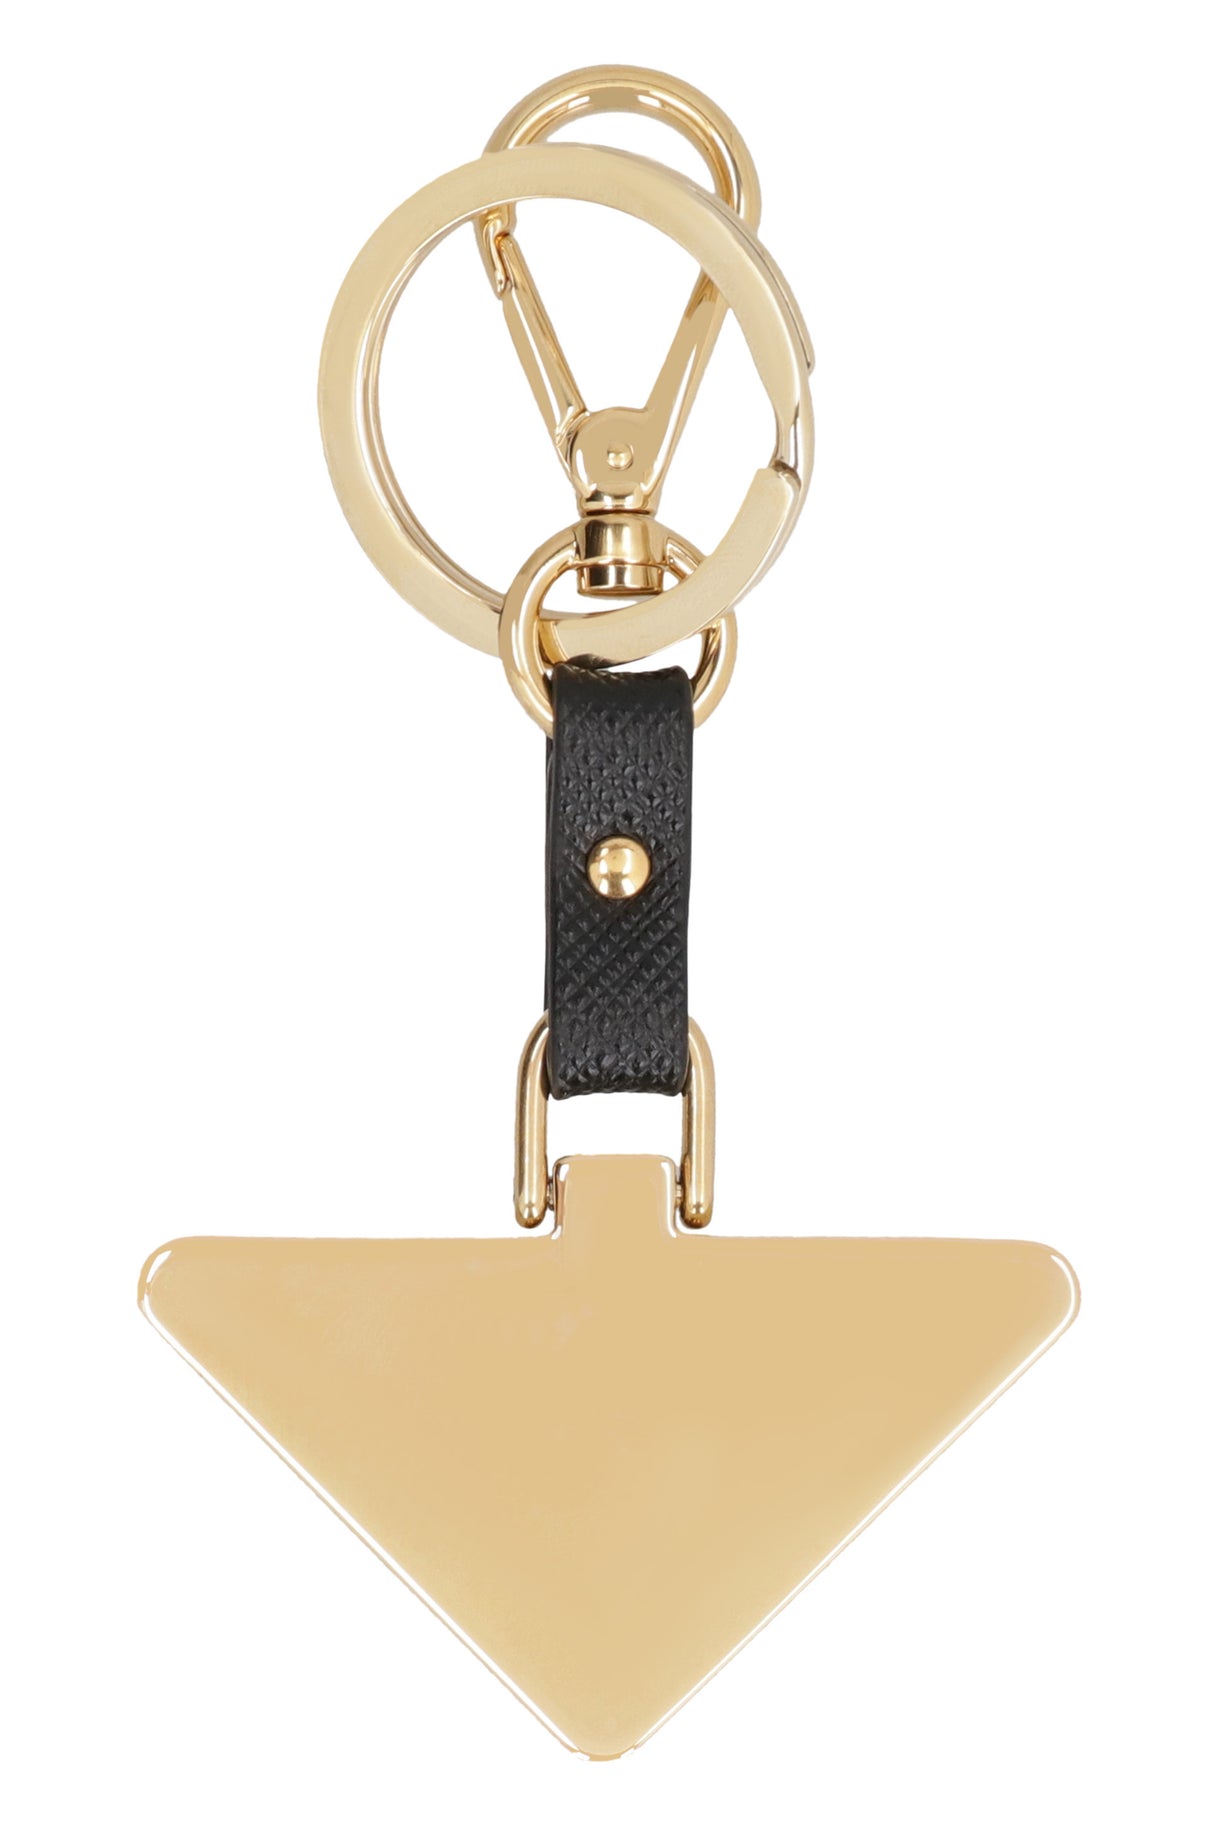 PRADA Classic Black Leather Keyring for Women - FW23 Collection